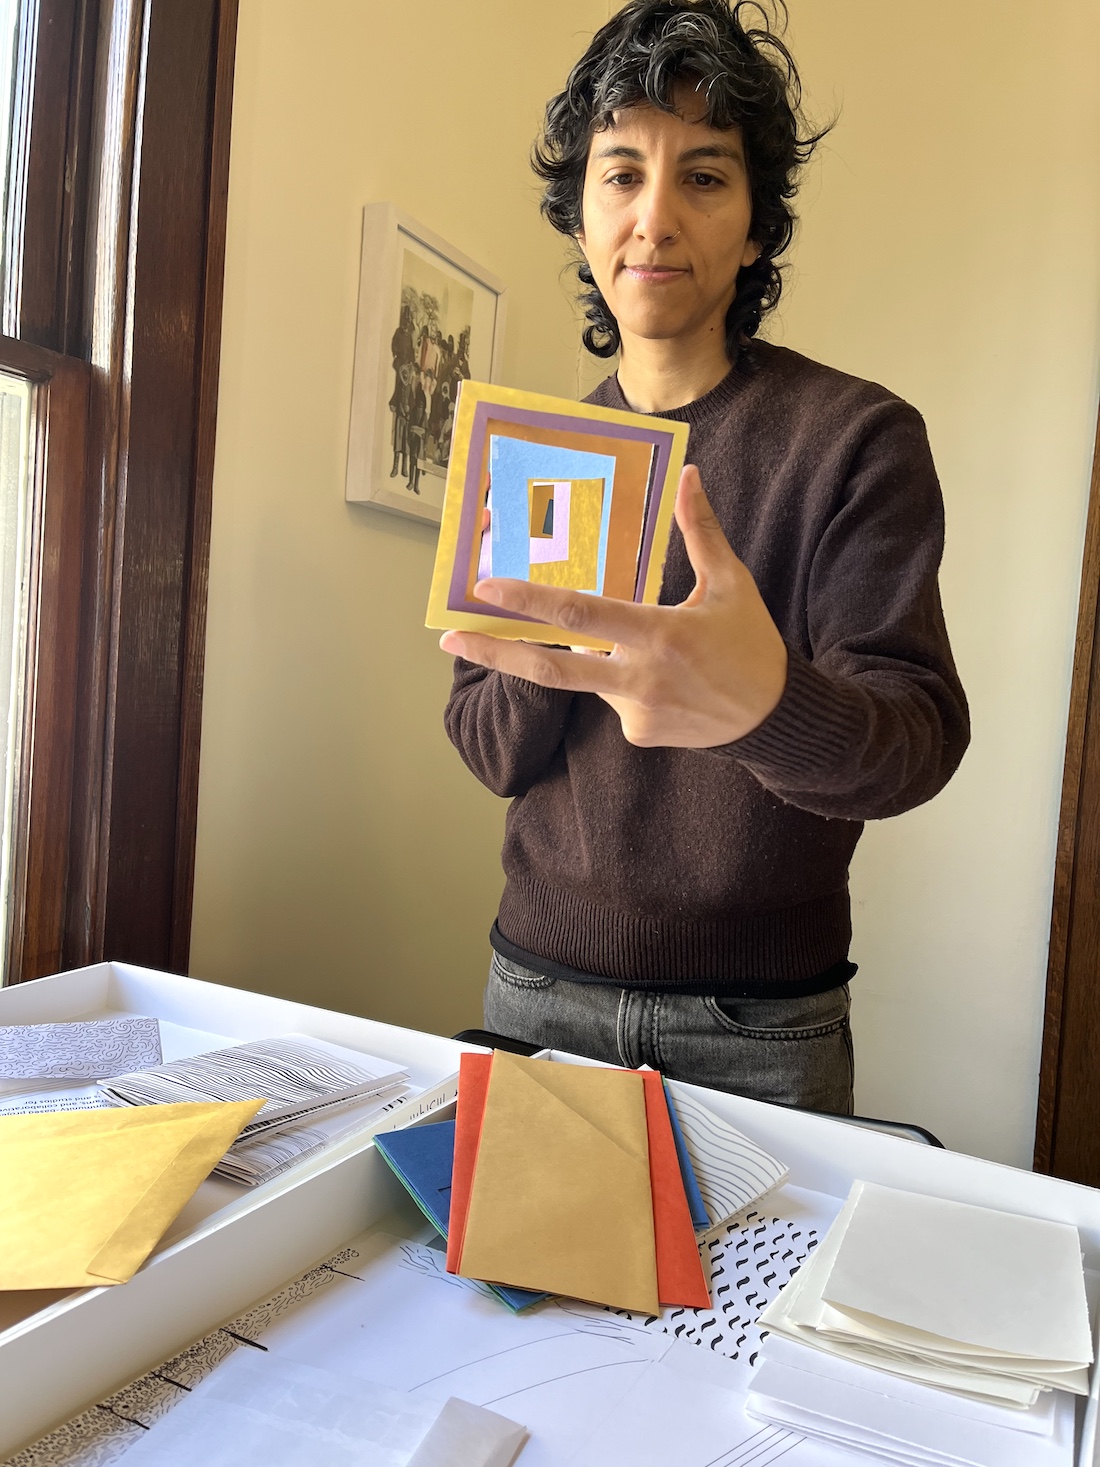 A person stands in a warmly lit living space with a table littered with construction paper and art supplies. They hold a small, colorful paper collage.